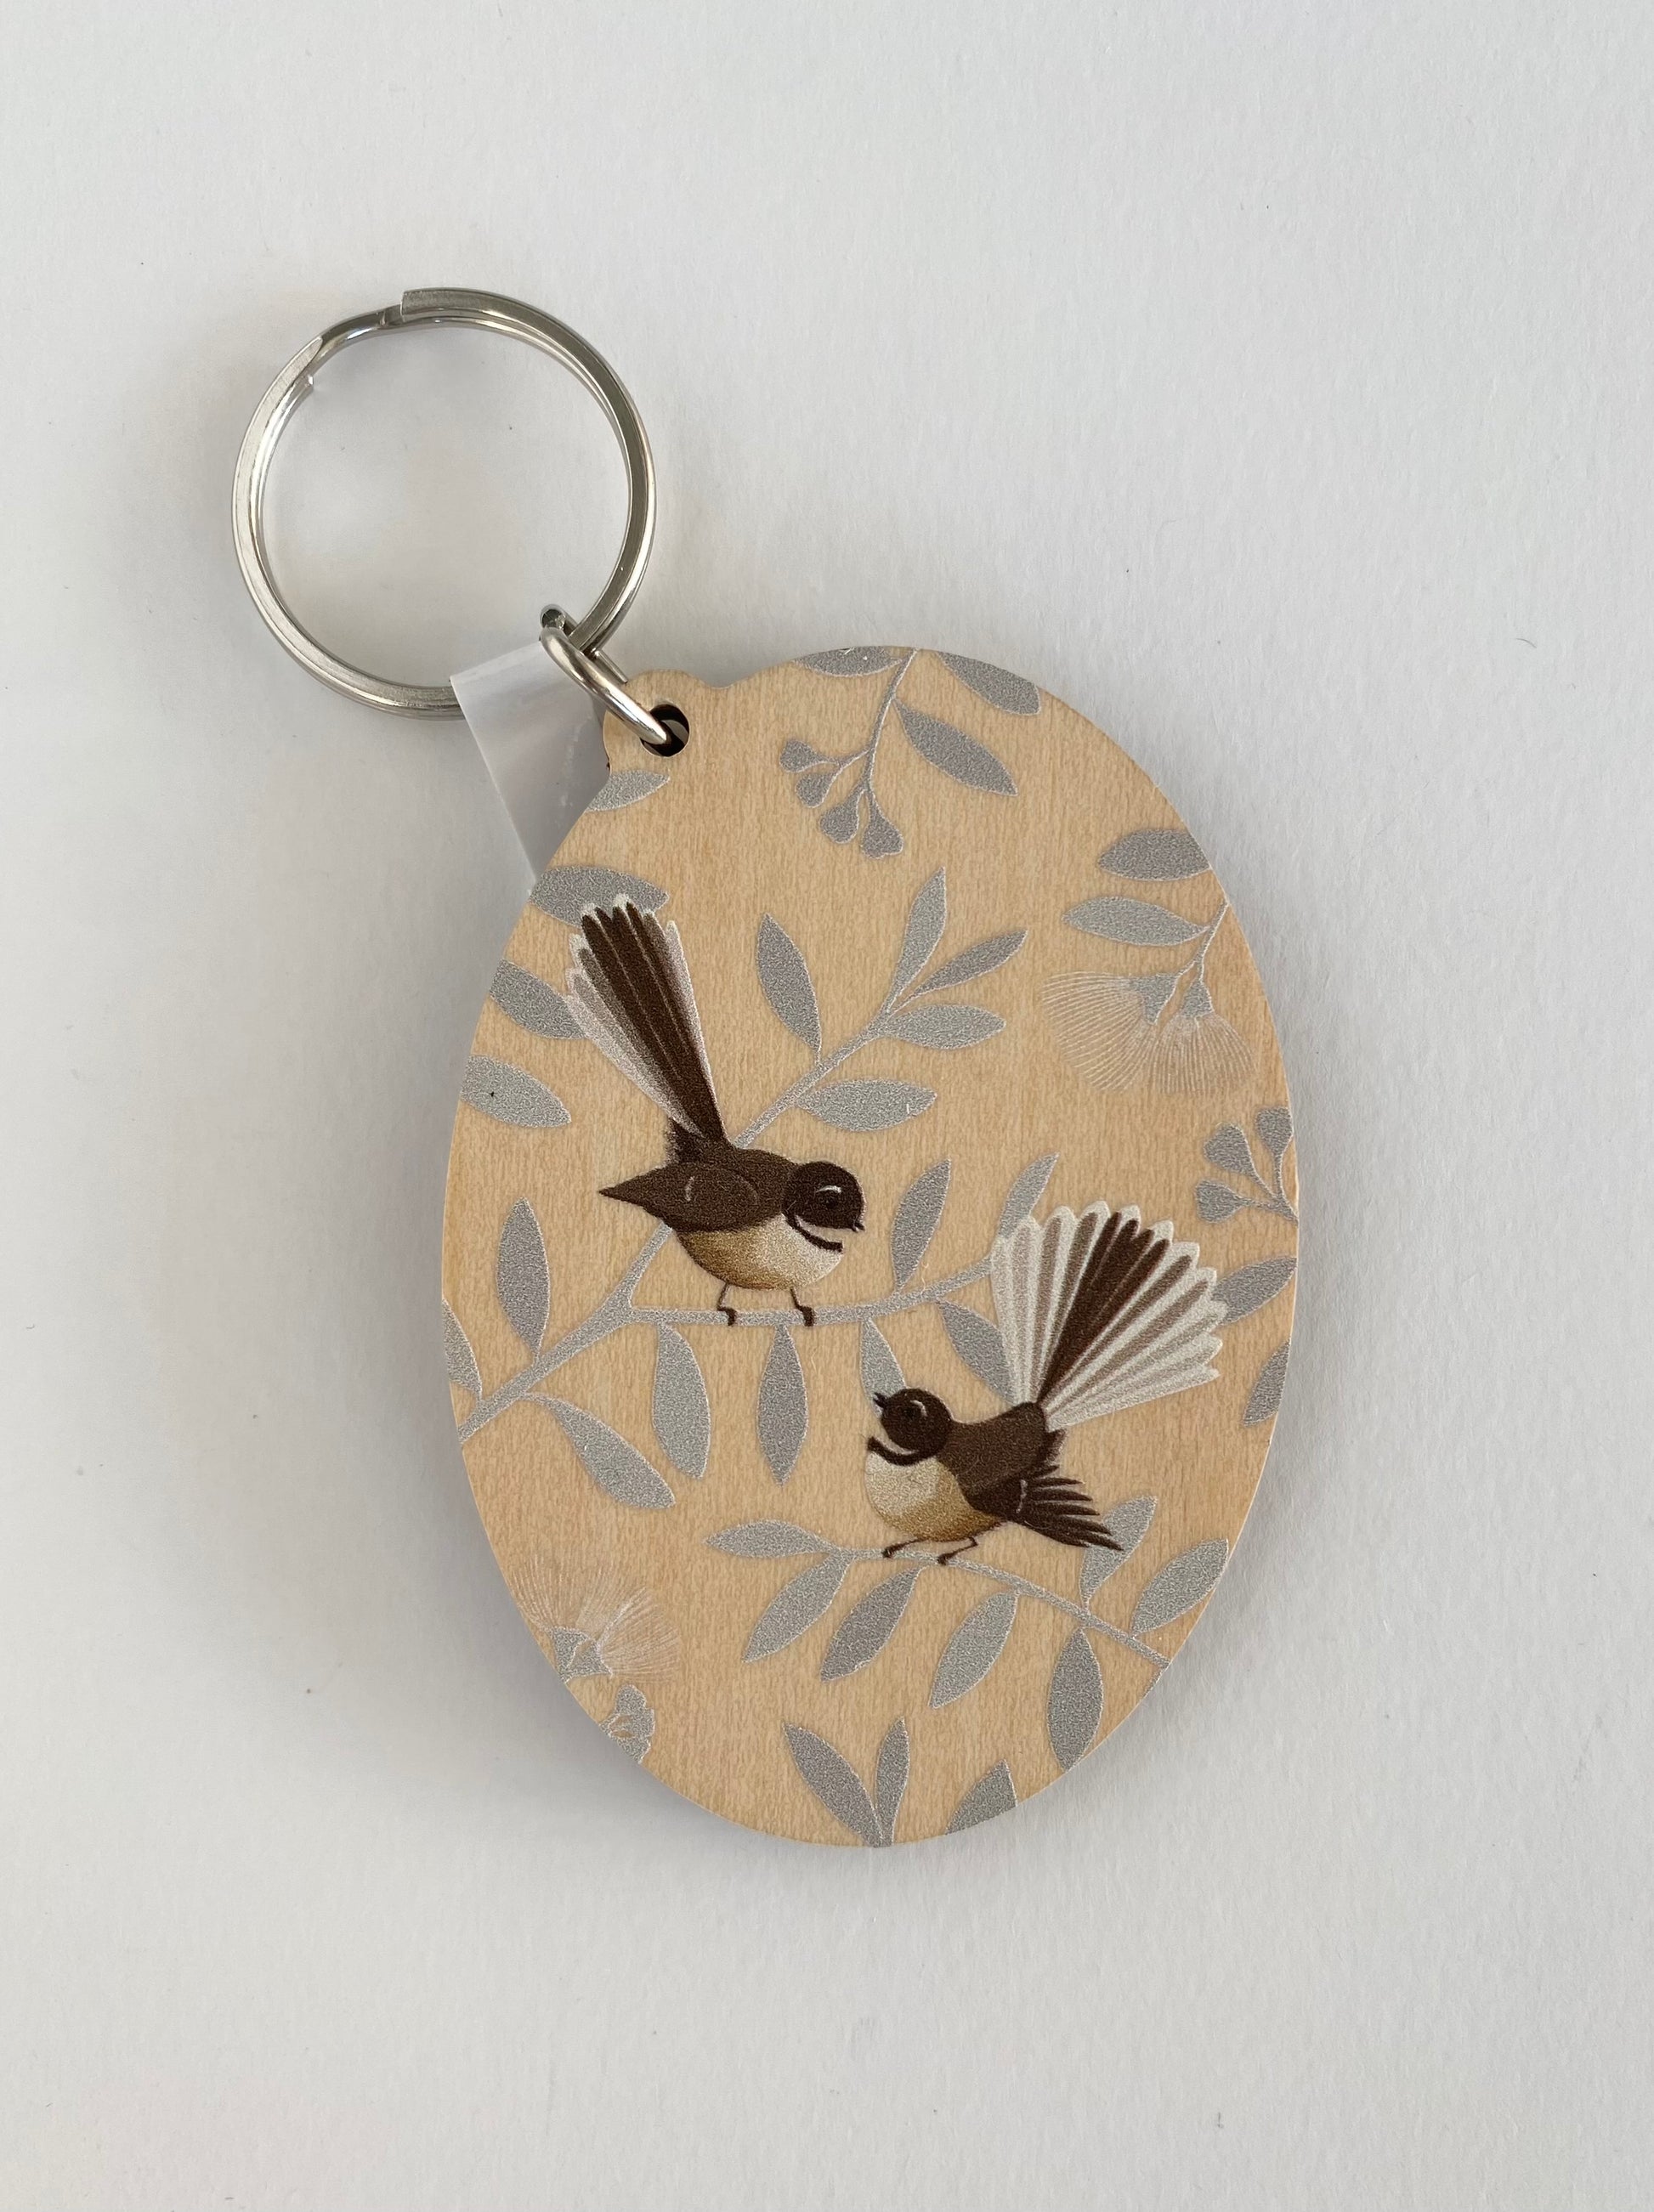 Fantail pair Wood Keytag art print by New Zealand artist Hansby Design